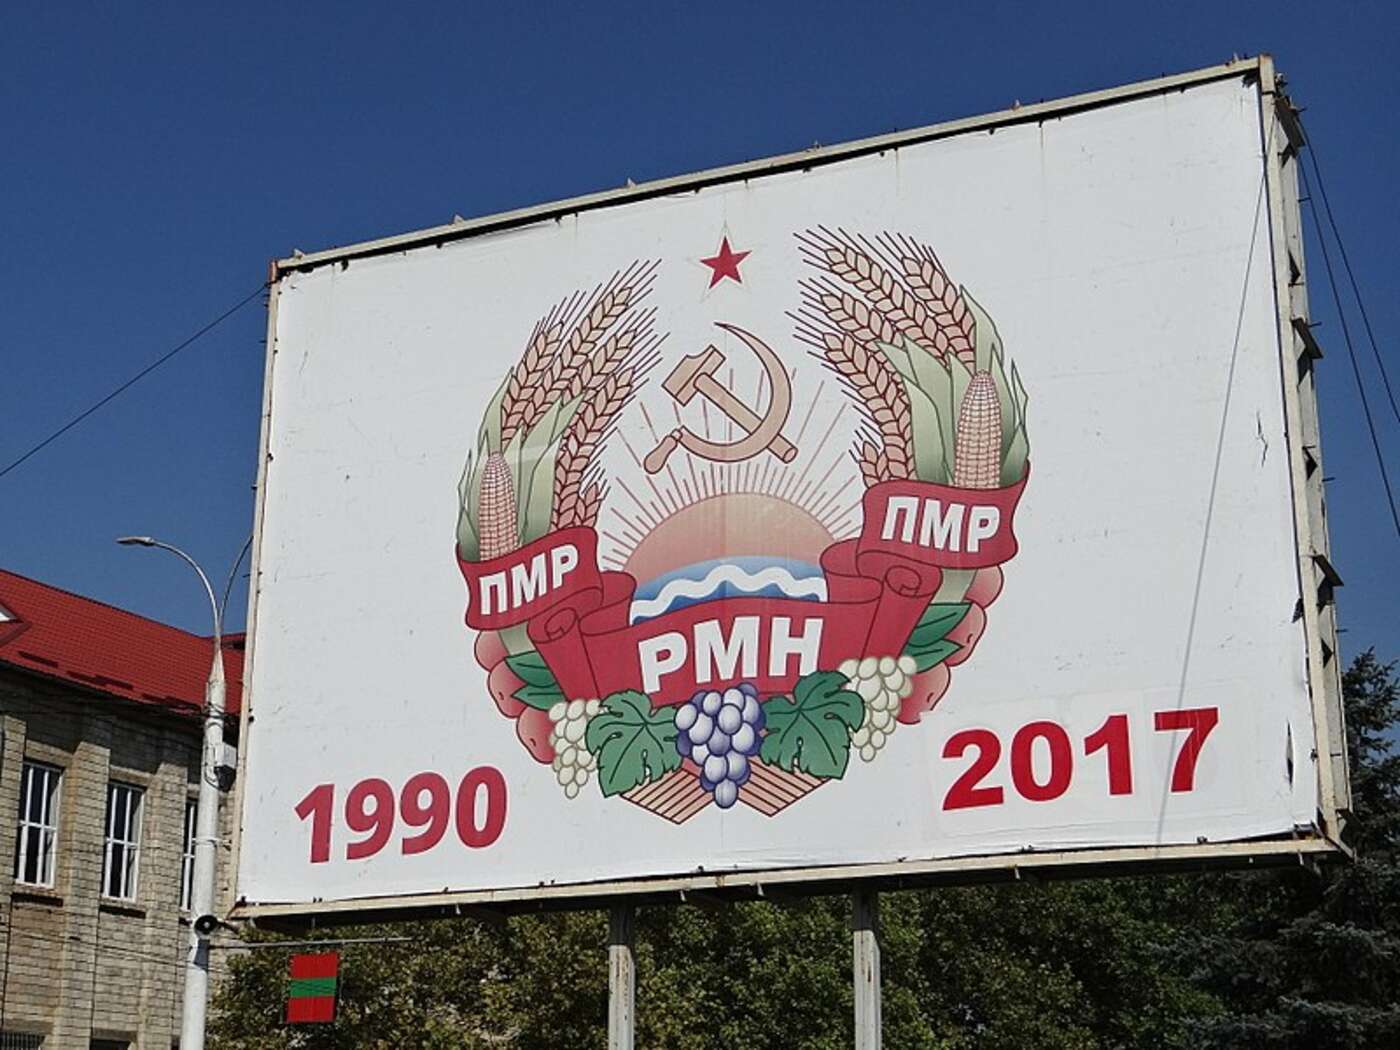 CC BY-SA 2.0: Billboard Commemorating 1990-2017 Independence - Tiraspol - Transnistria; picture by Jones, Adam Ph.D.